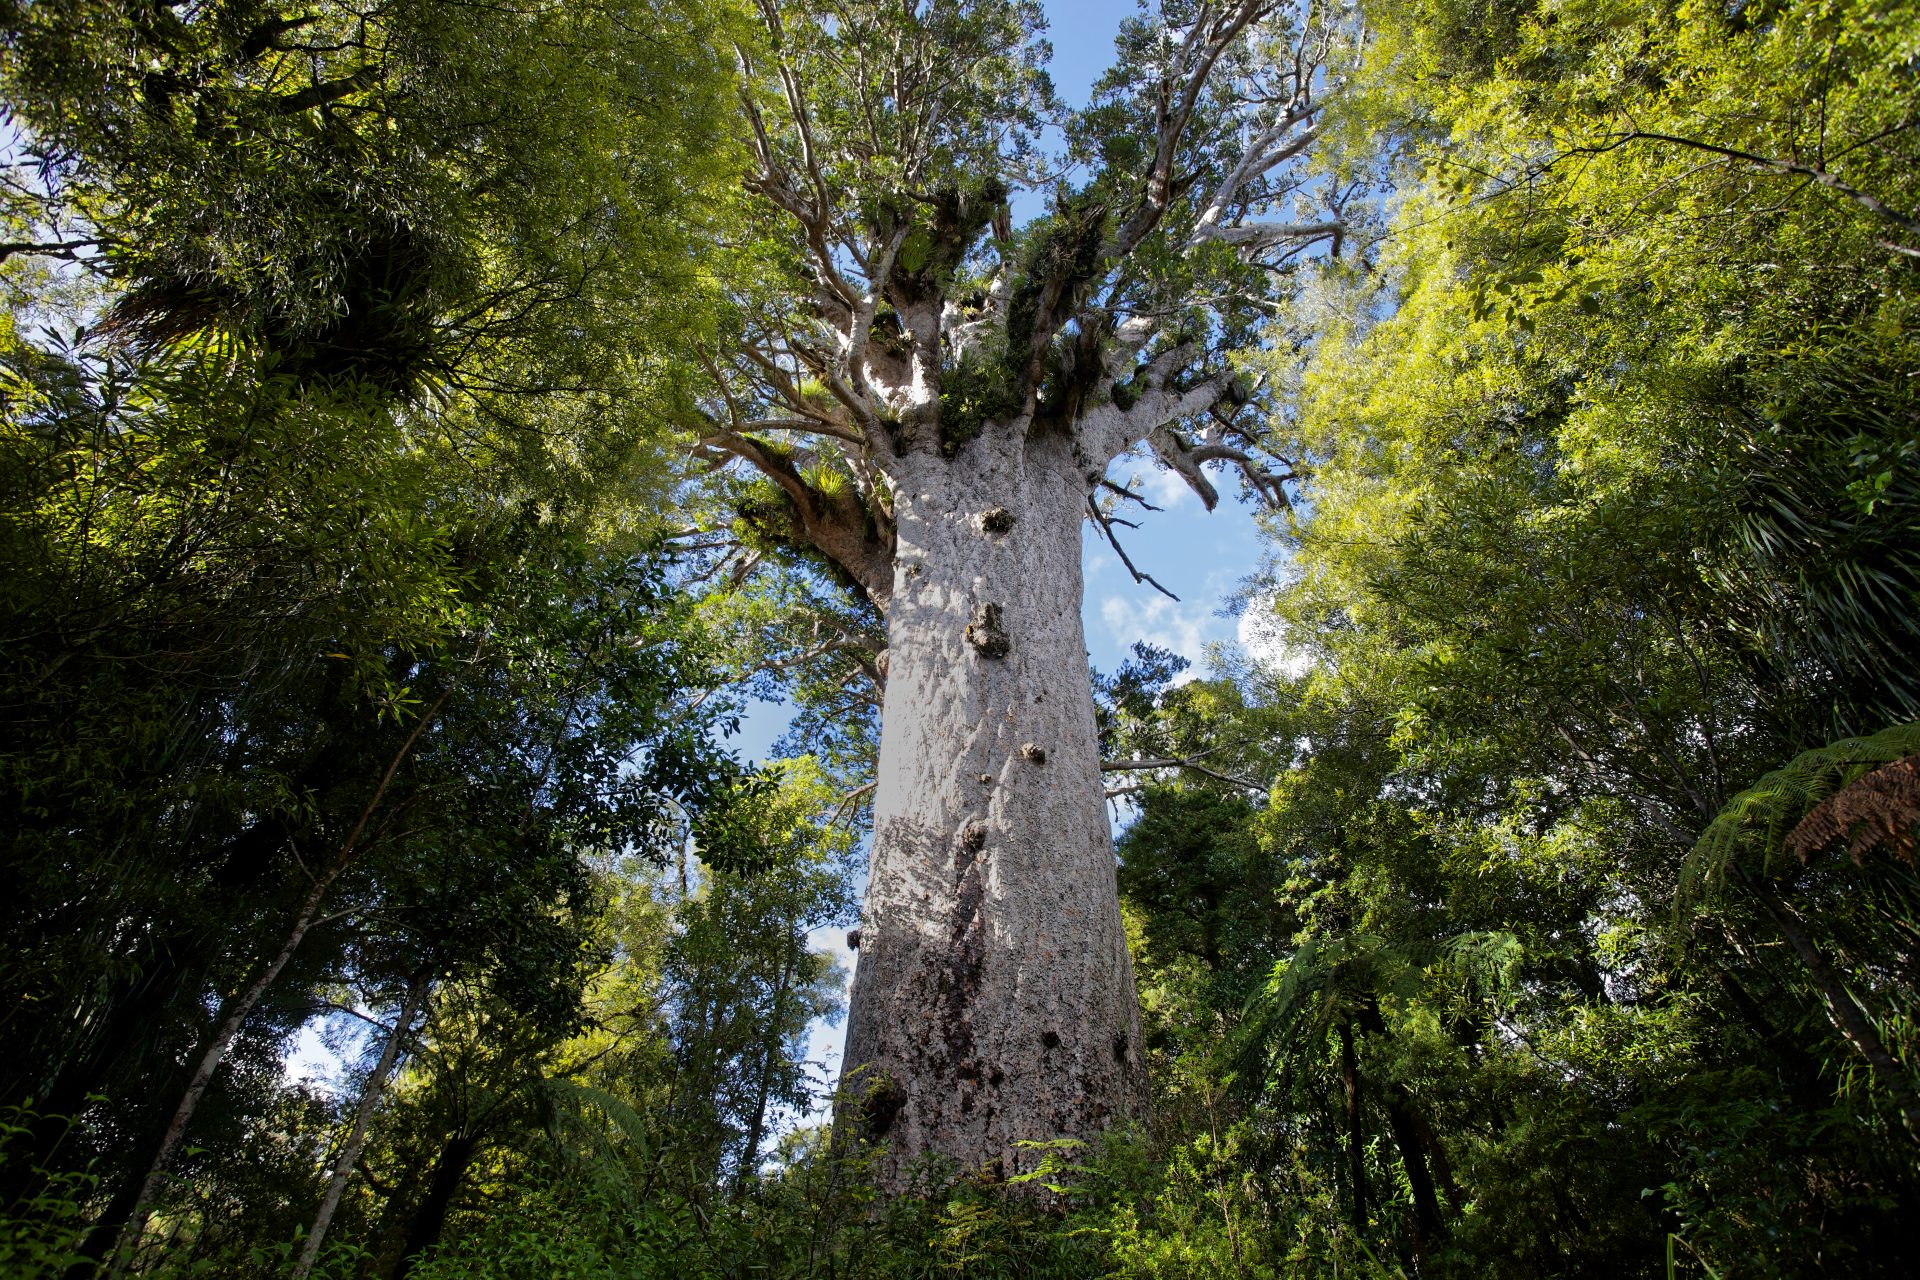 Tāne Mahuta (God of the Forest), New Zealand - Between 1,250 and 2,000 years old